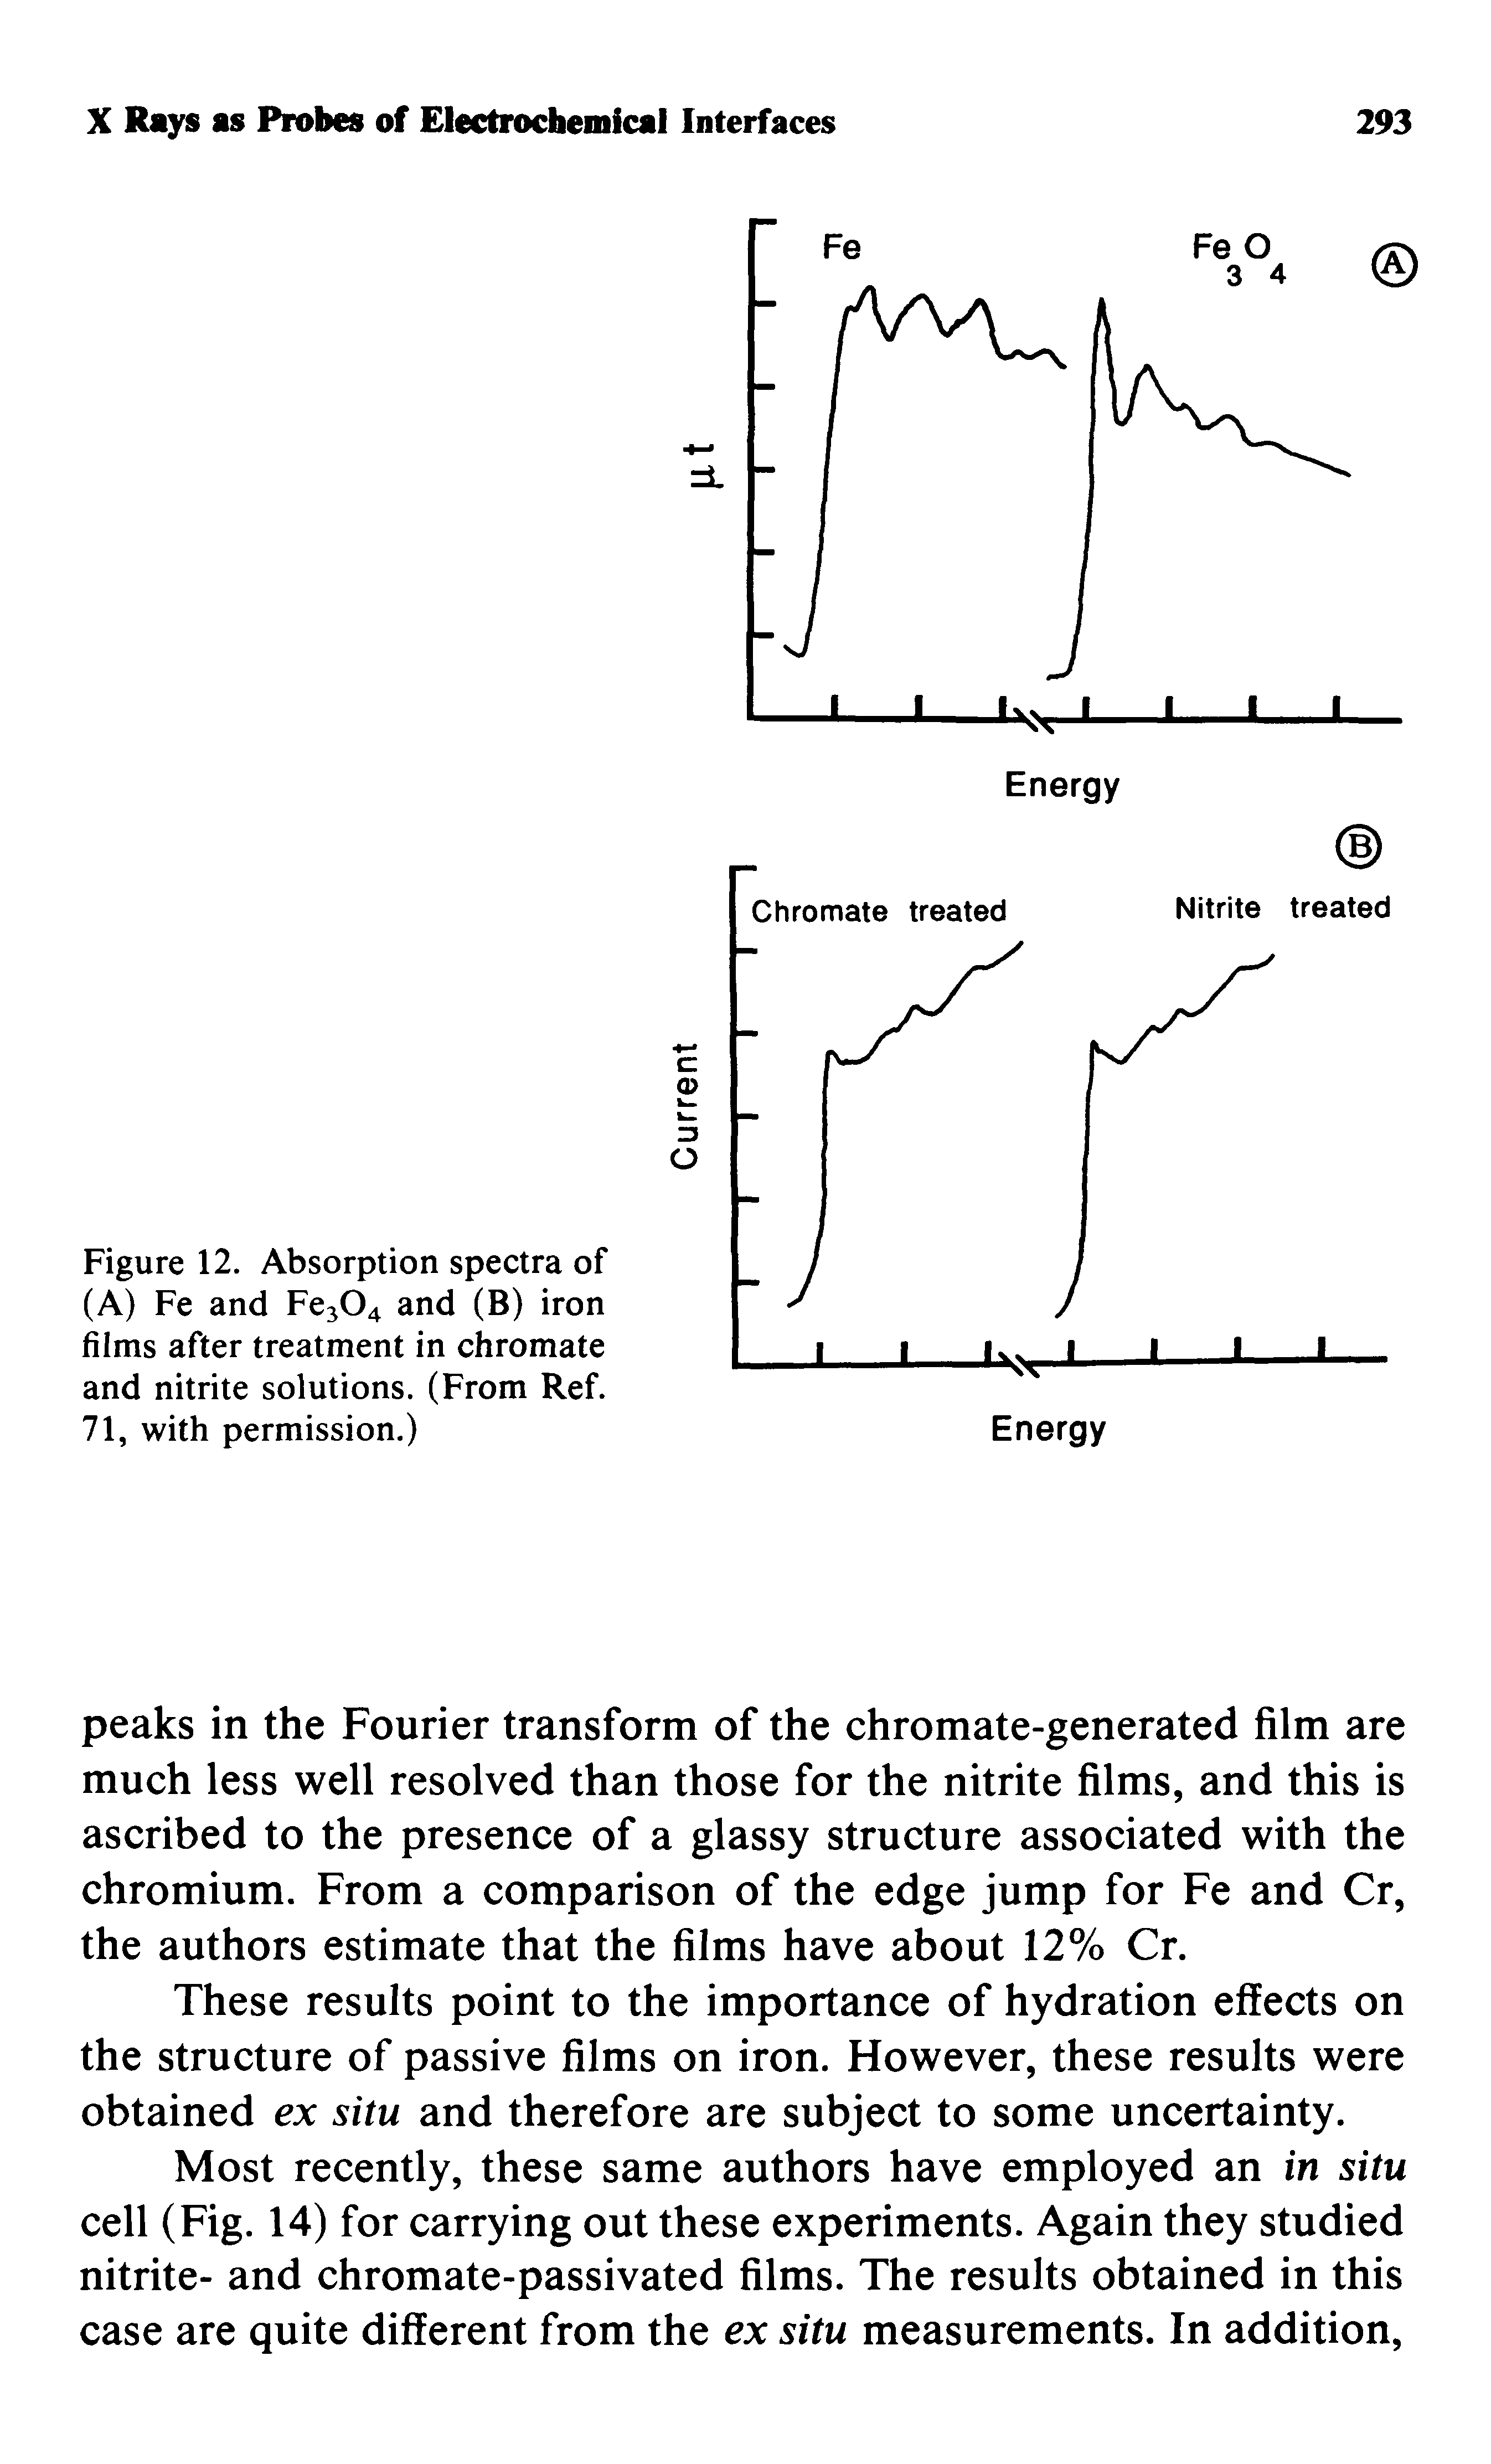 Figure 12. Absorption spectra of (A) Fe and Fe304 and (B) iron films after treatment in chromate and nitrite solutions. (From Ref. 71, with permission.)...